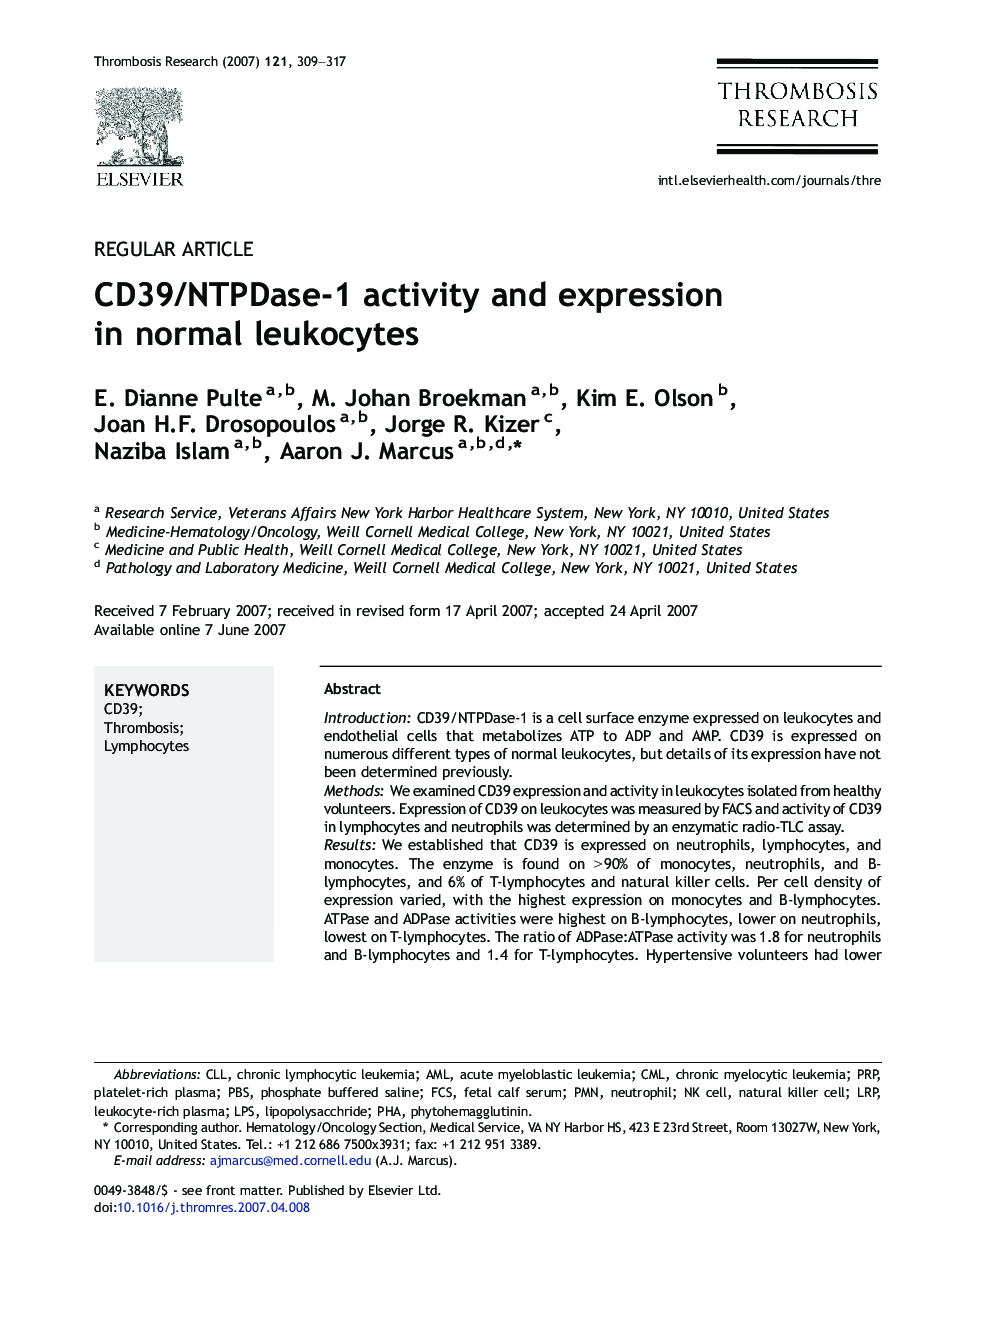 CD39/NTPDase-1 activity and expression in normal leukocytes